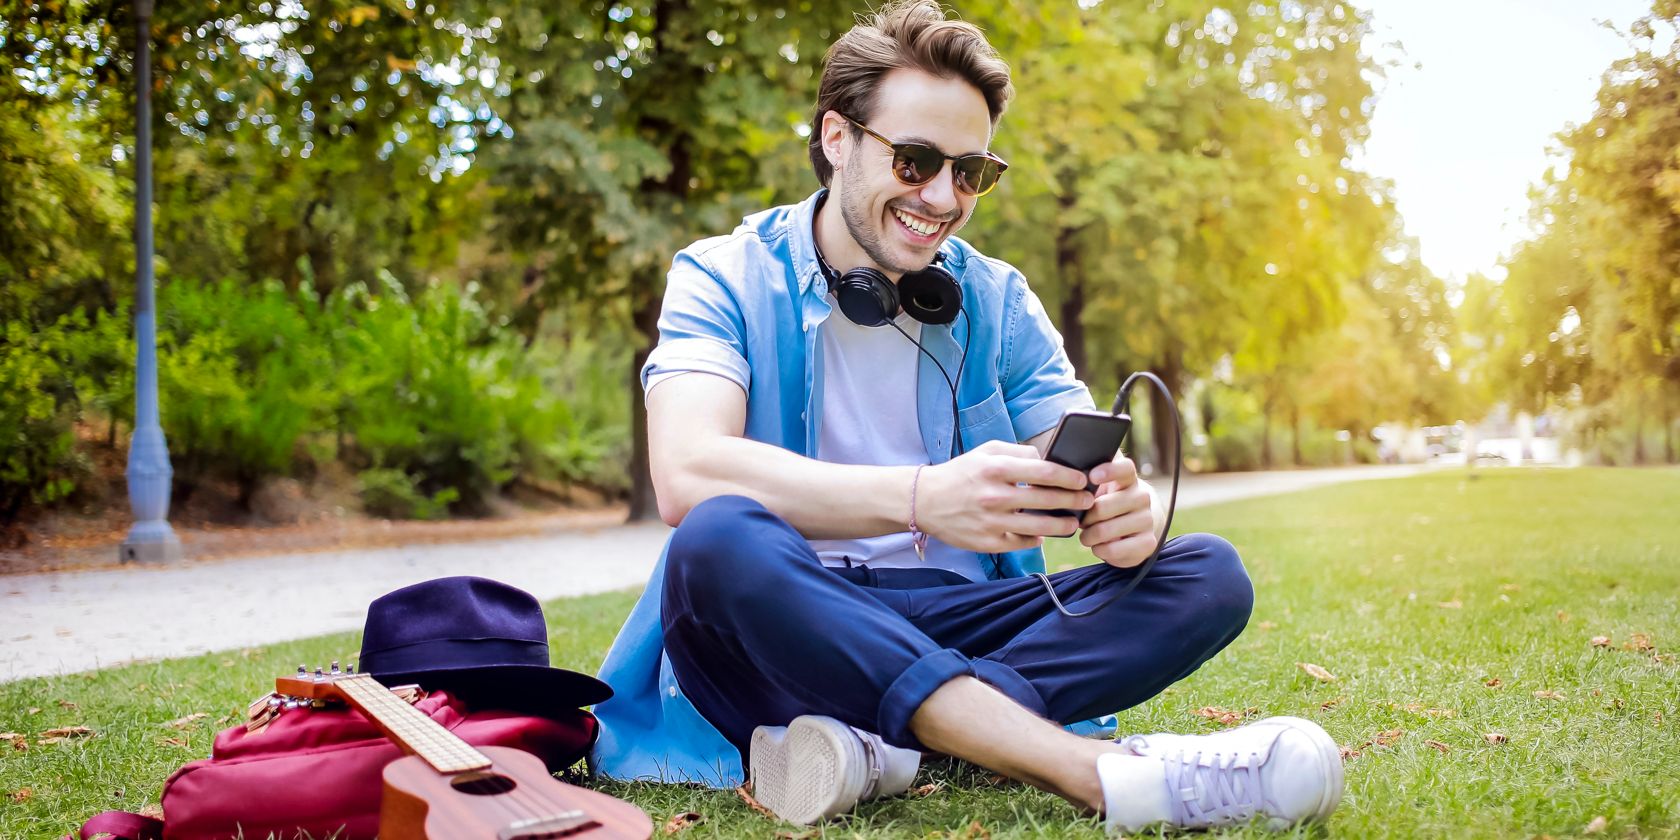 A happy man sits on the grass with a ukelele using a smartphone and headphones